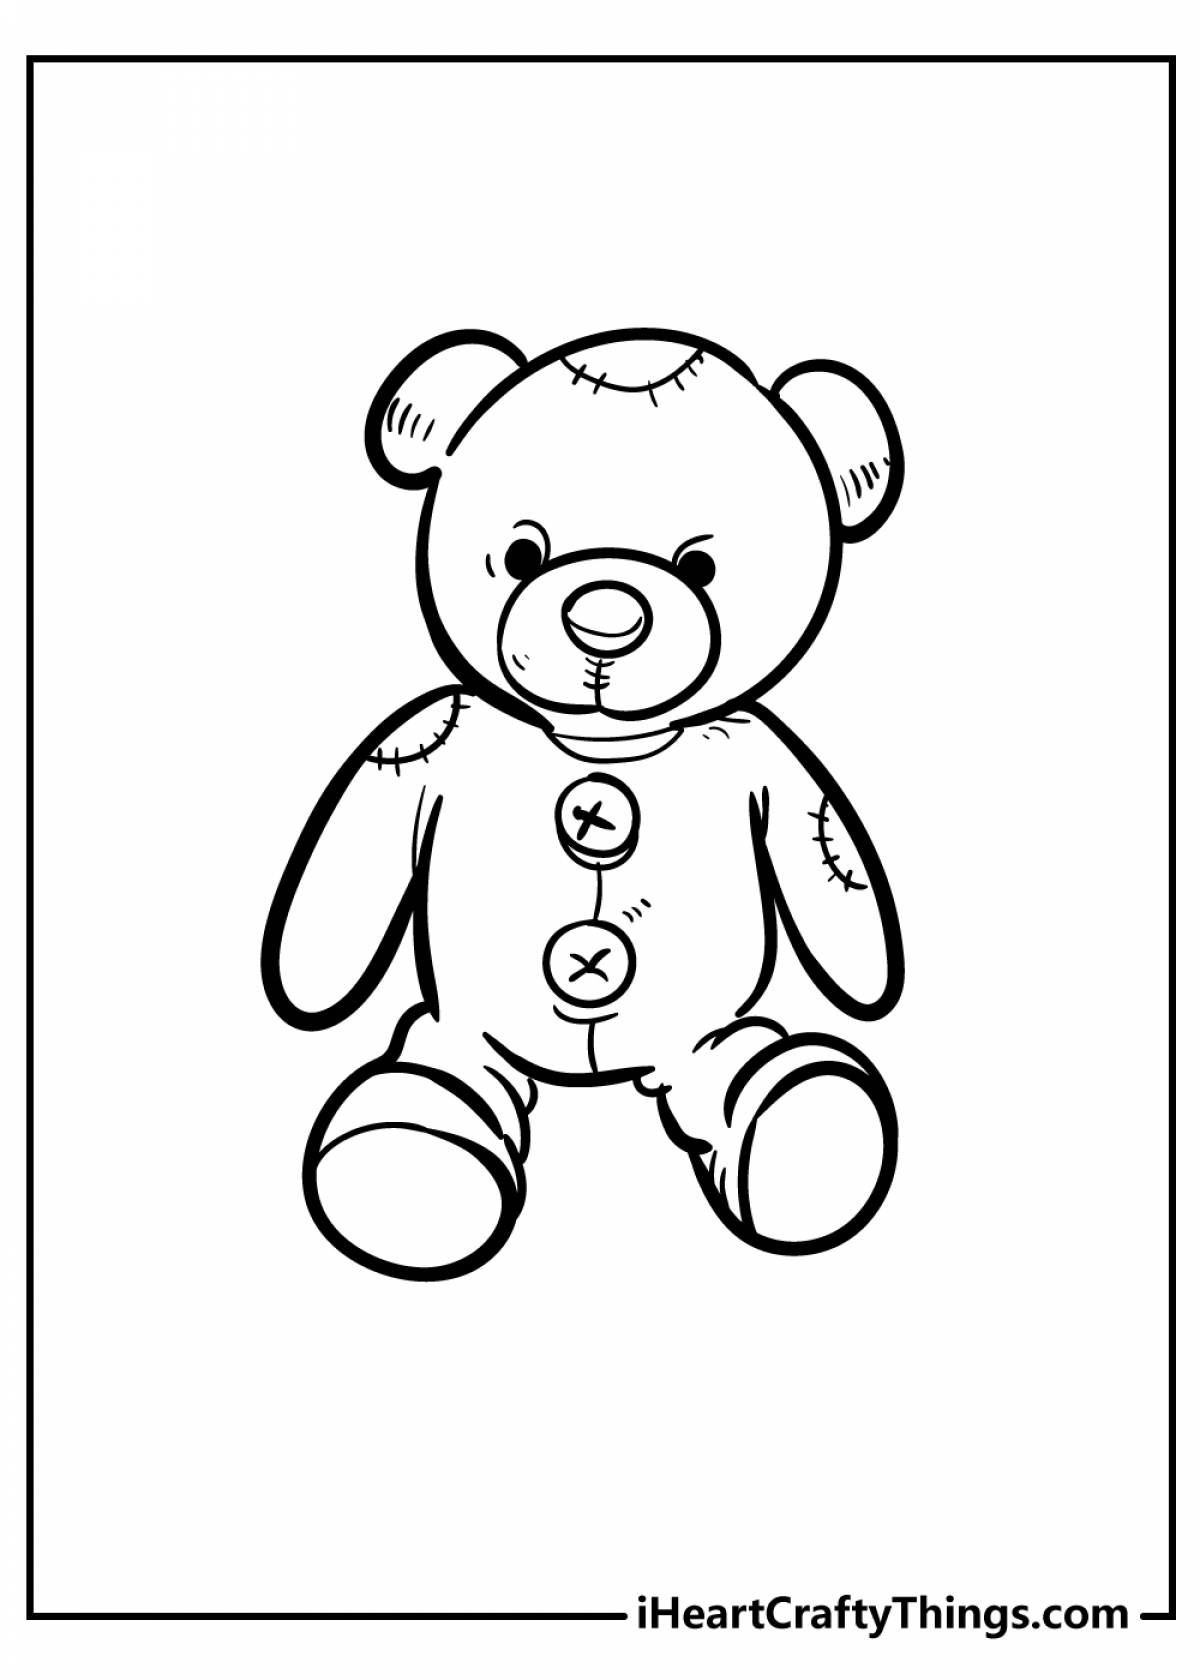 Coloring page dazzling bear and rabbit